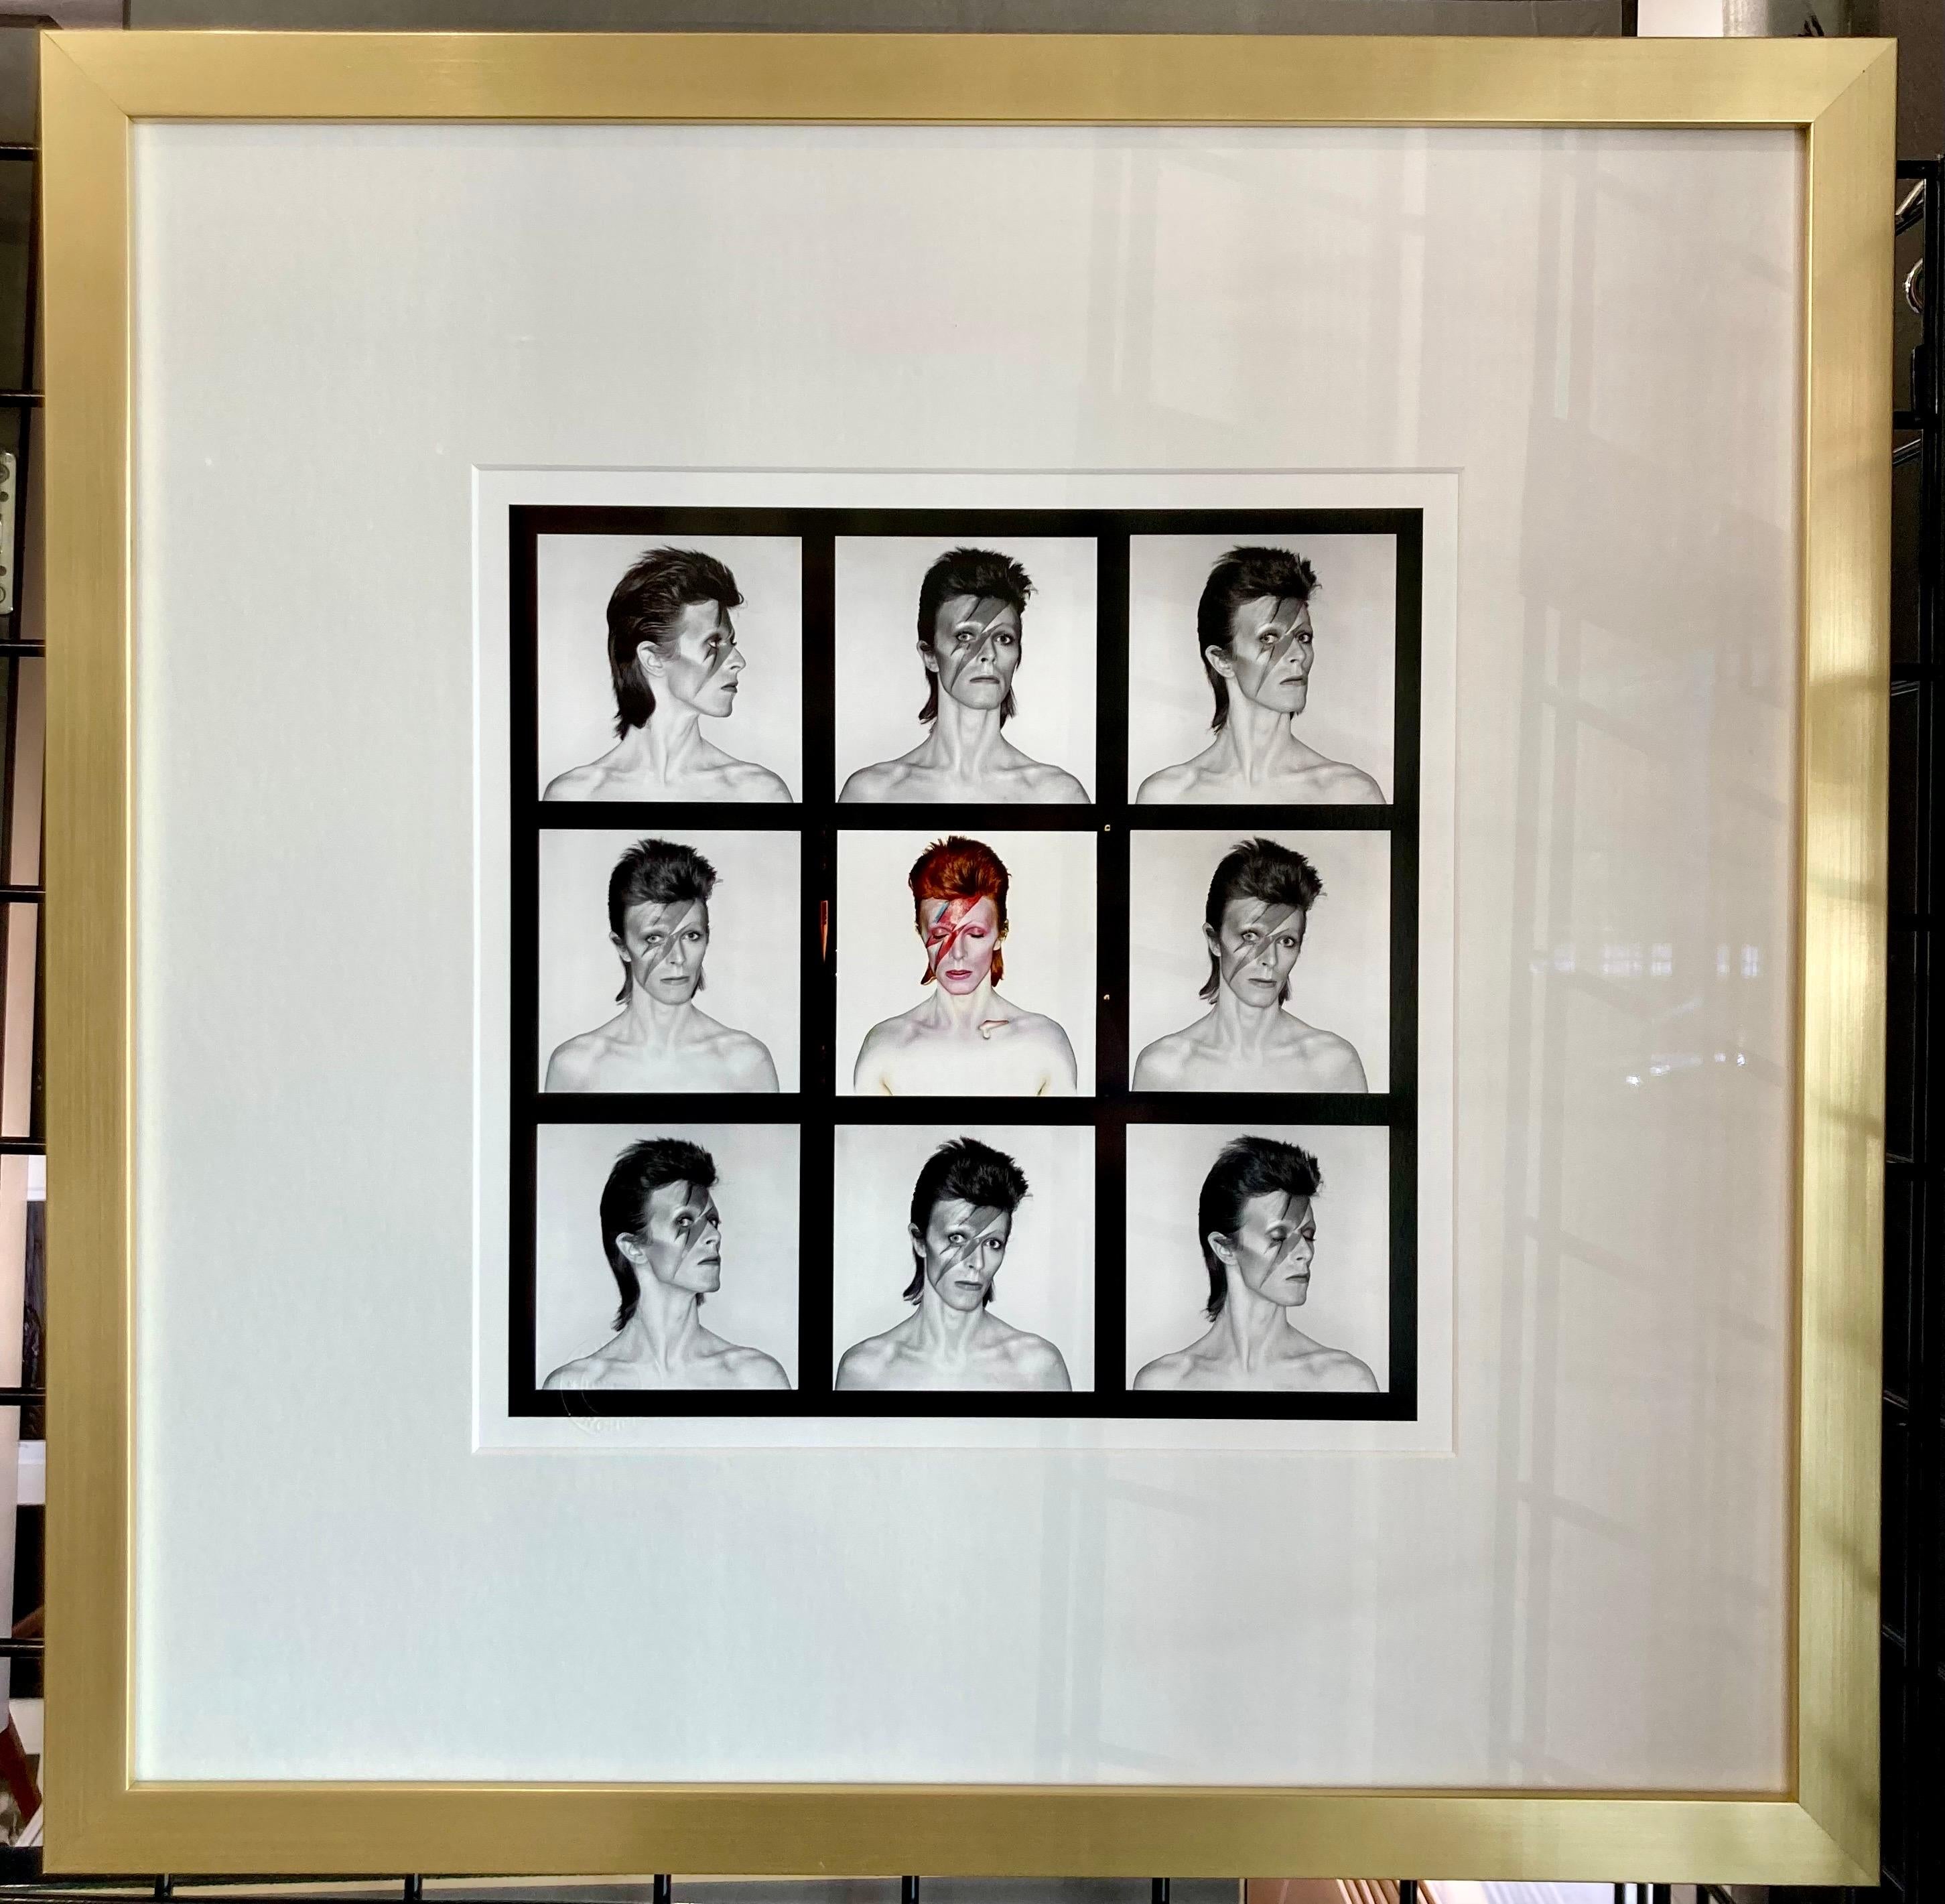 David Bowie Aladdin Sane contact sheet print from Brian Duffy, taken during the phot shoot for the Aladdin Sane album cover. The print features the Aladdin Sane album cover in color in the middle frame, with various outtakes in monochrome in the